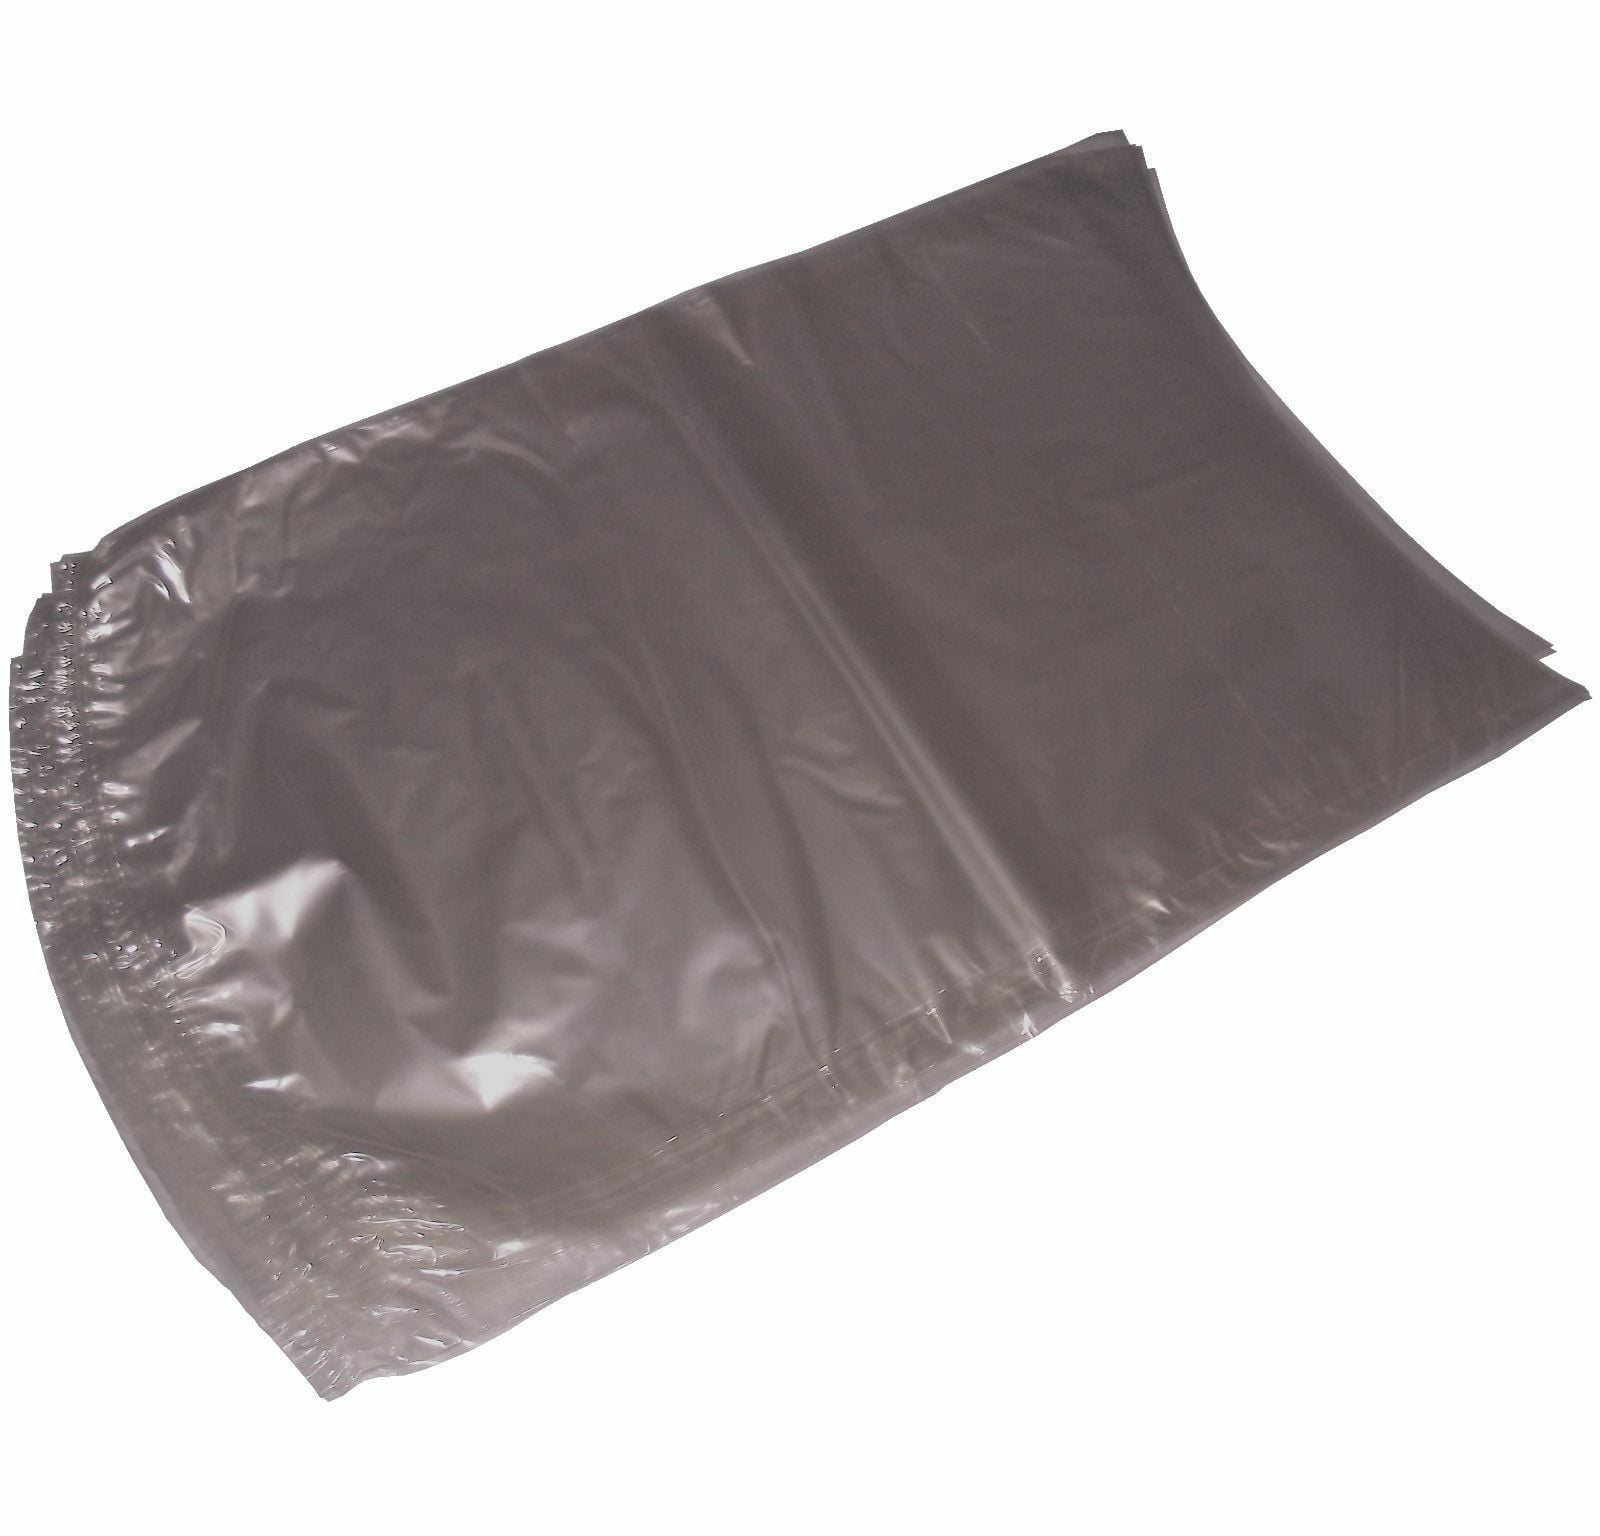 Fresh Poultry Shrink Bag,Pvdc Poultry Heat Shrink Bags,Poultry